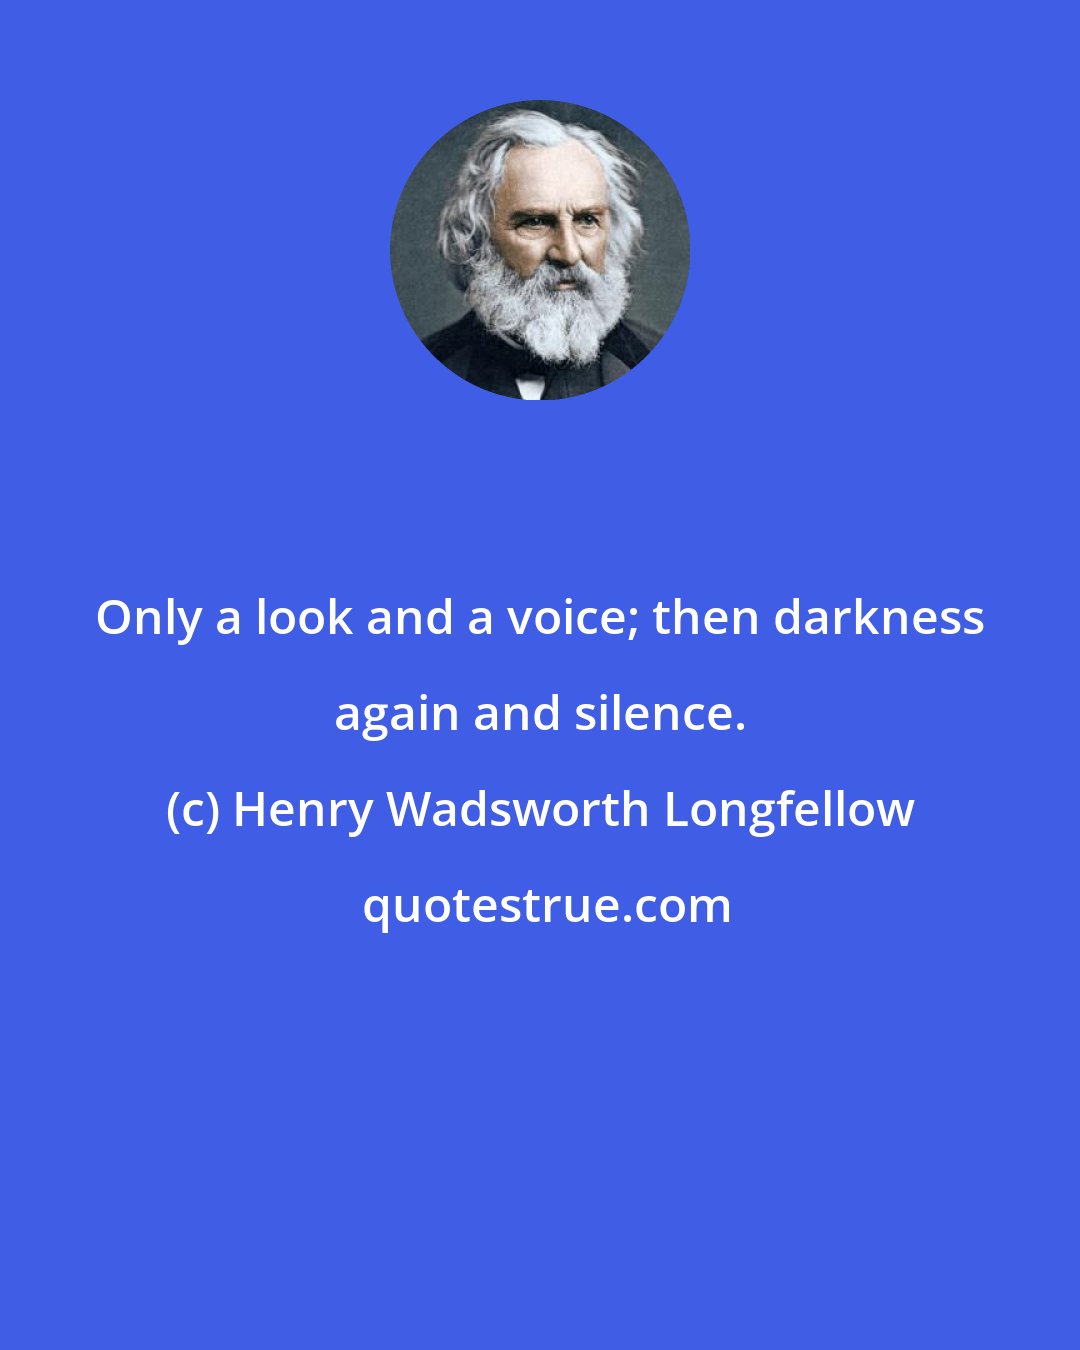 Henry Wadsworth Longfellow: Only a look and a voice; then darkness again and silence.